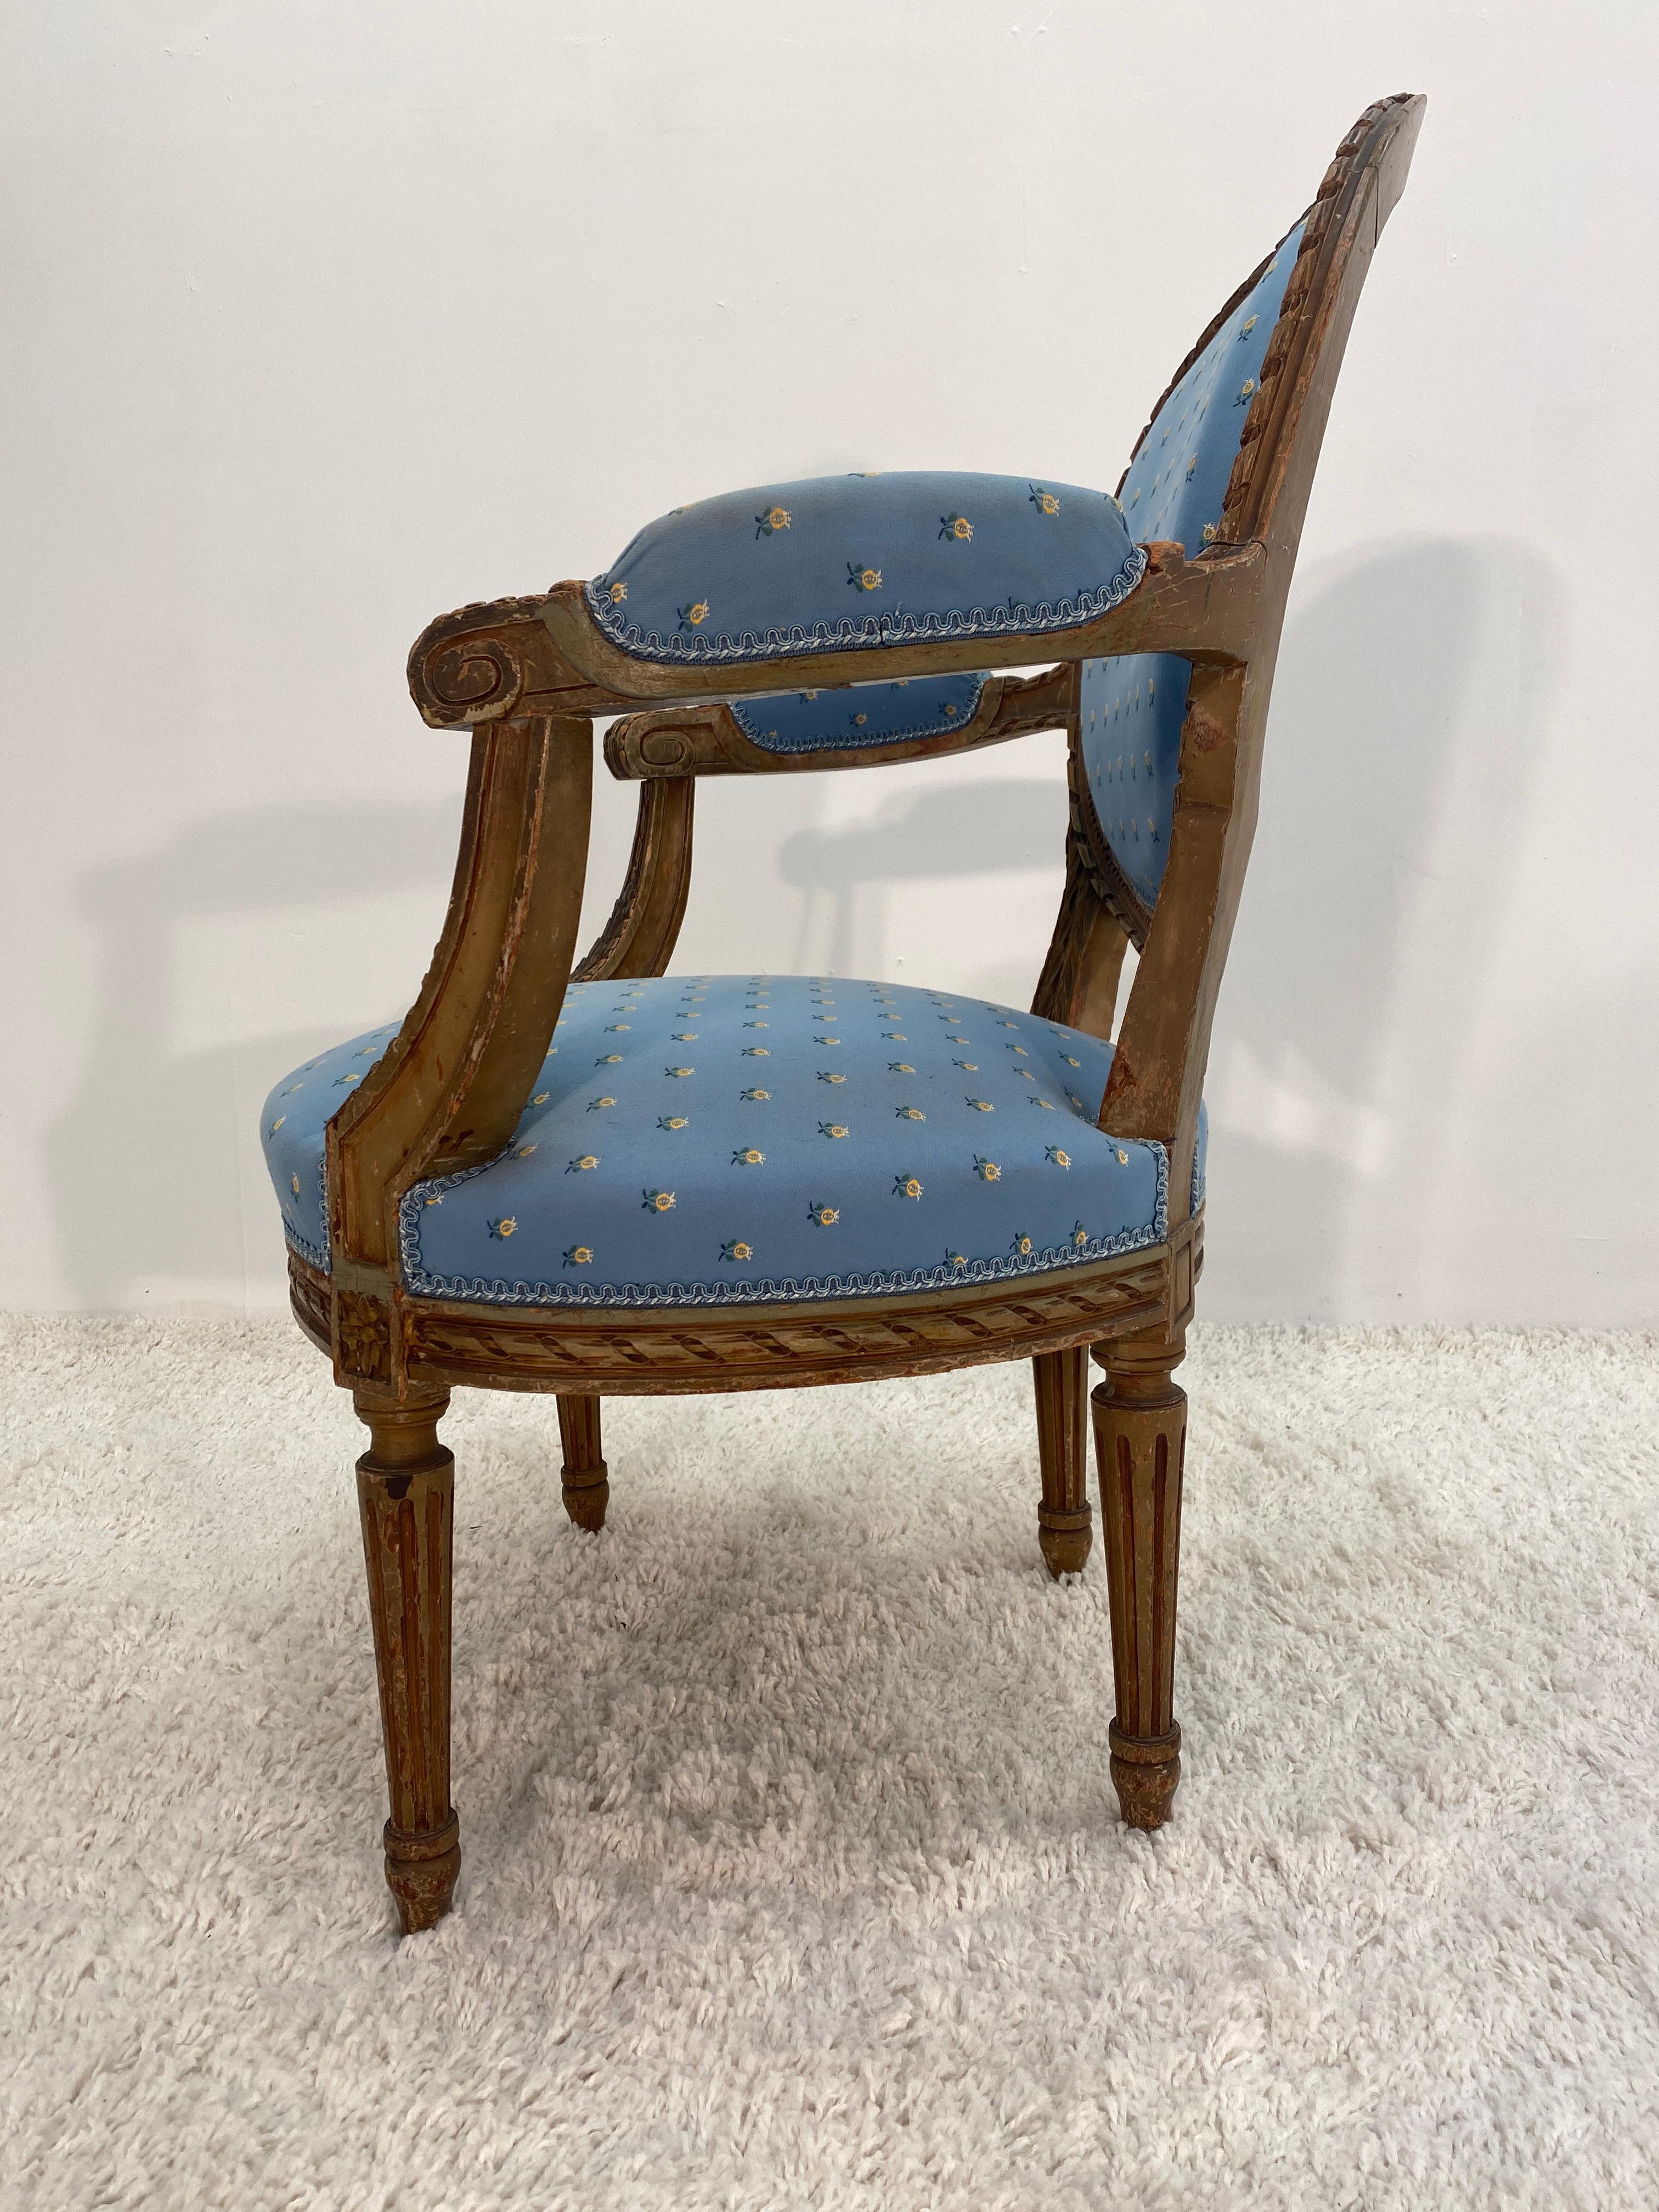 Painted 19th Century French Louis XVI Style Fauteuil Arm Chair In Good Condition For Sale In Nashville, TN